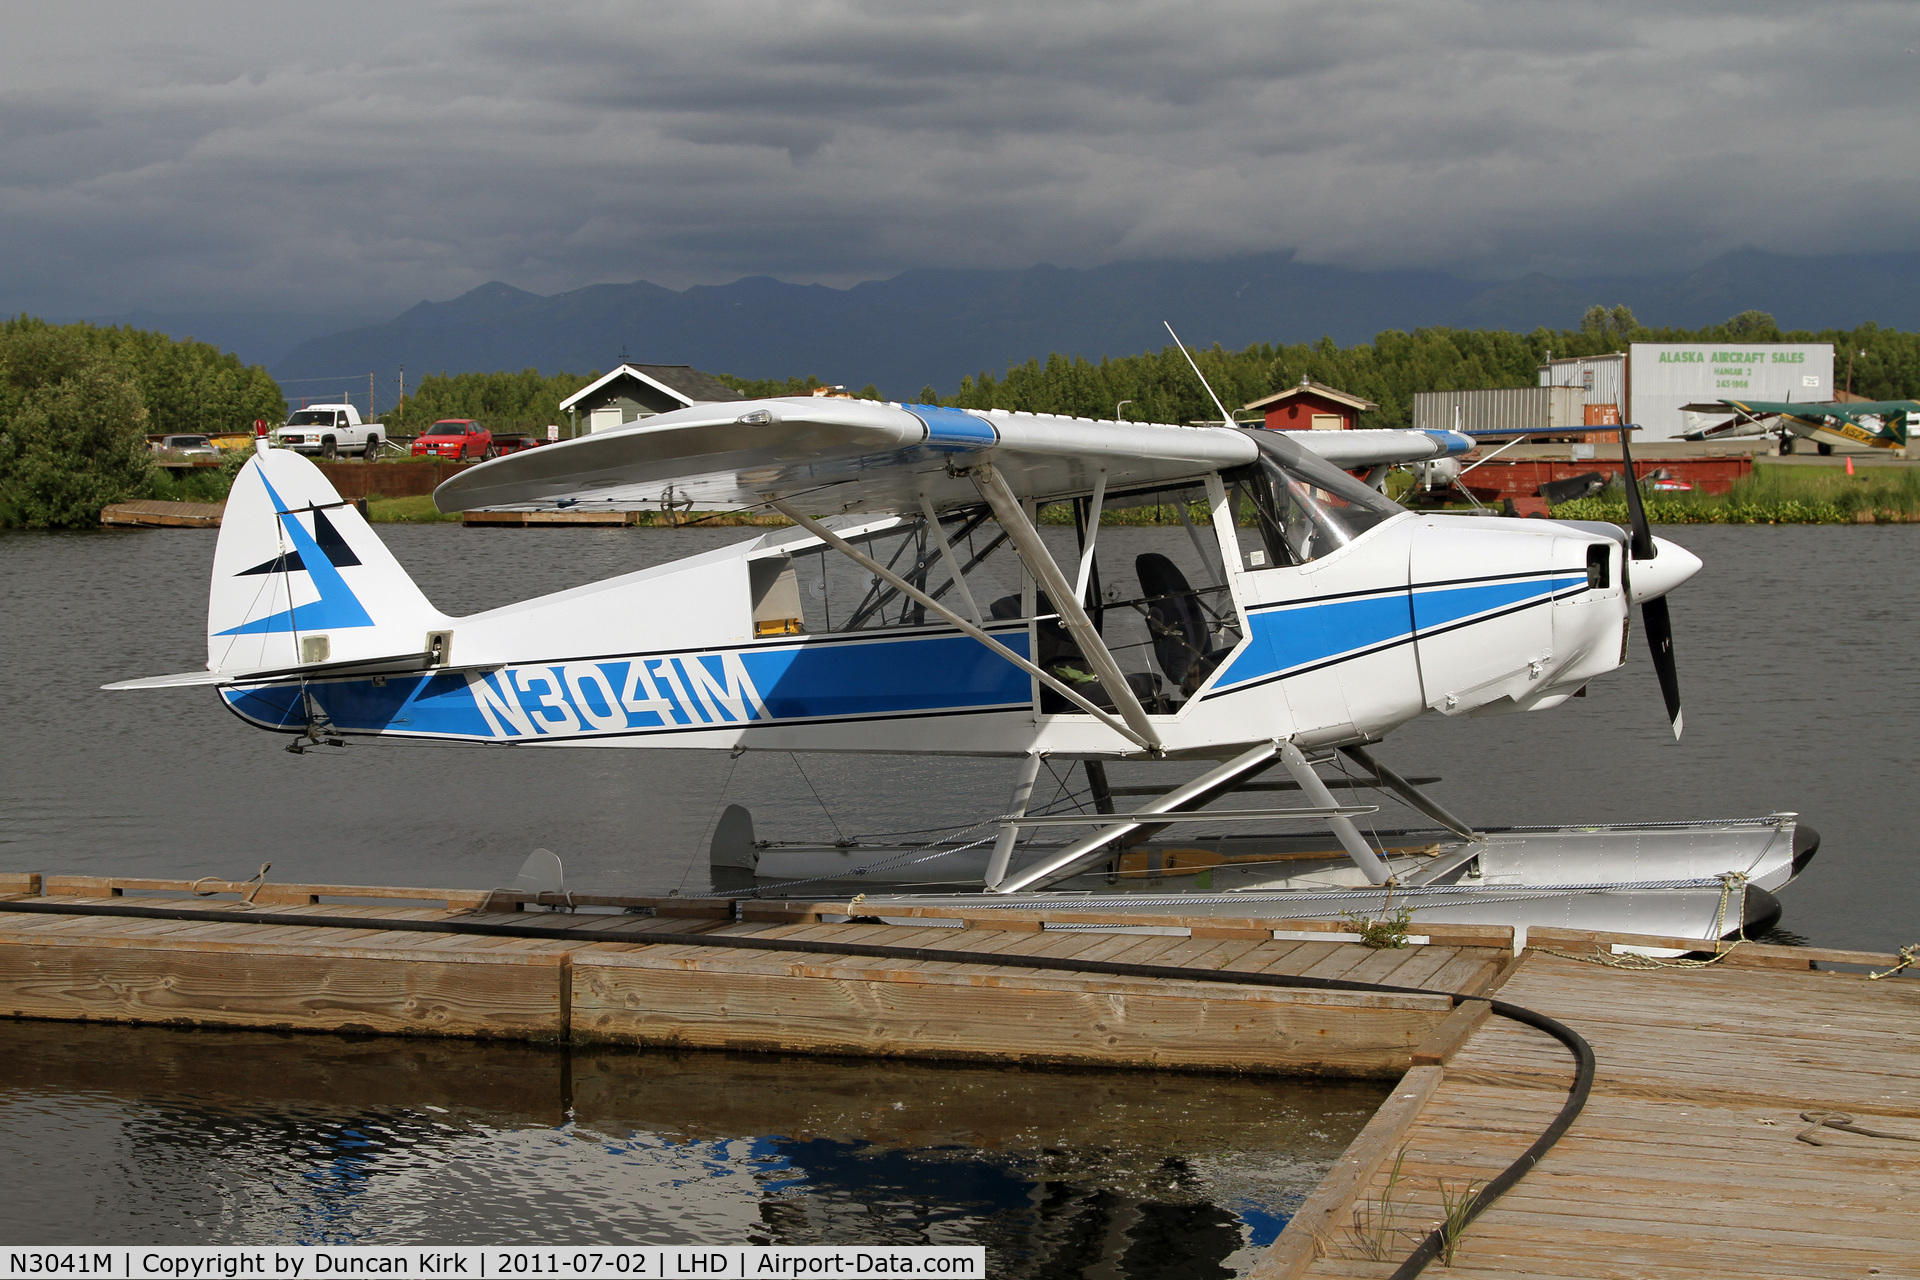 N3041M, 1947 Piper PA-12 Super Cruiser C/N 12-1733, 64 years old and going strong